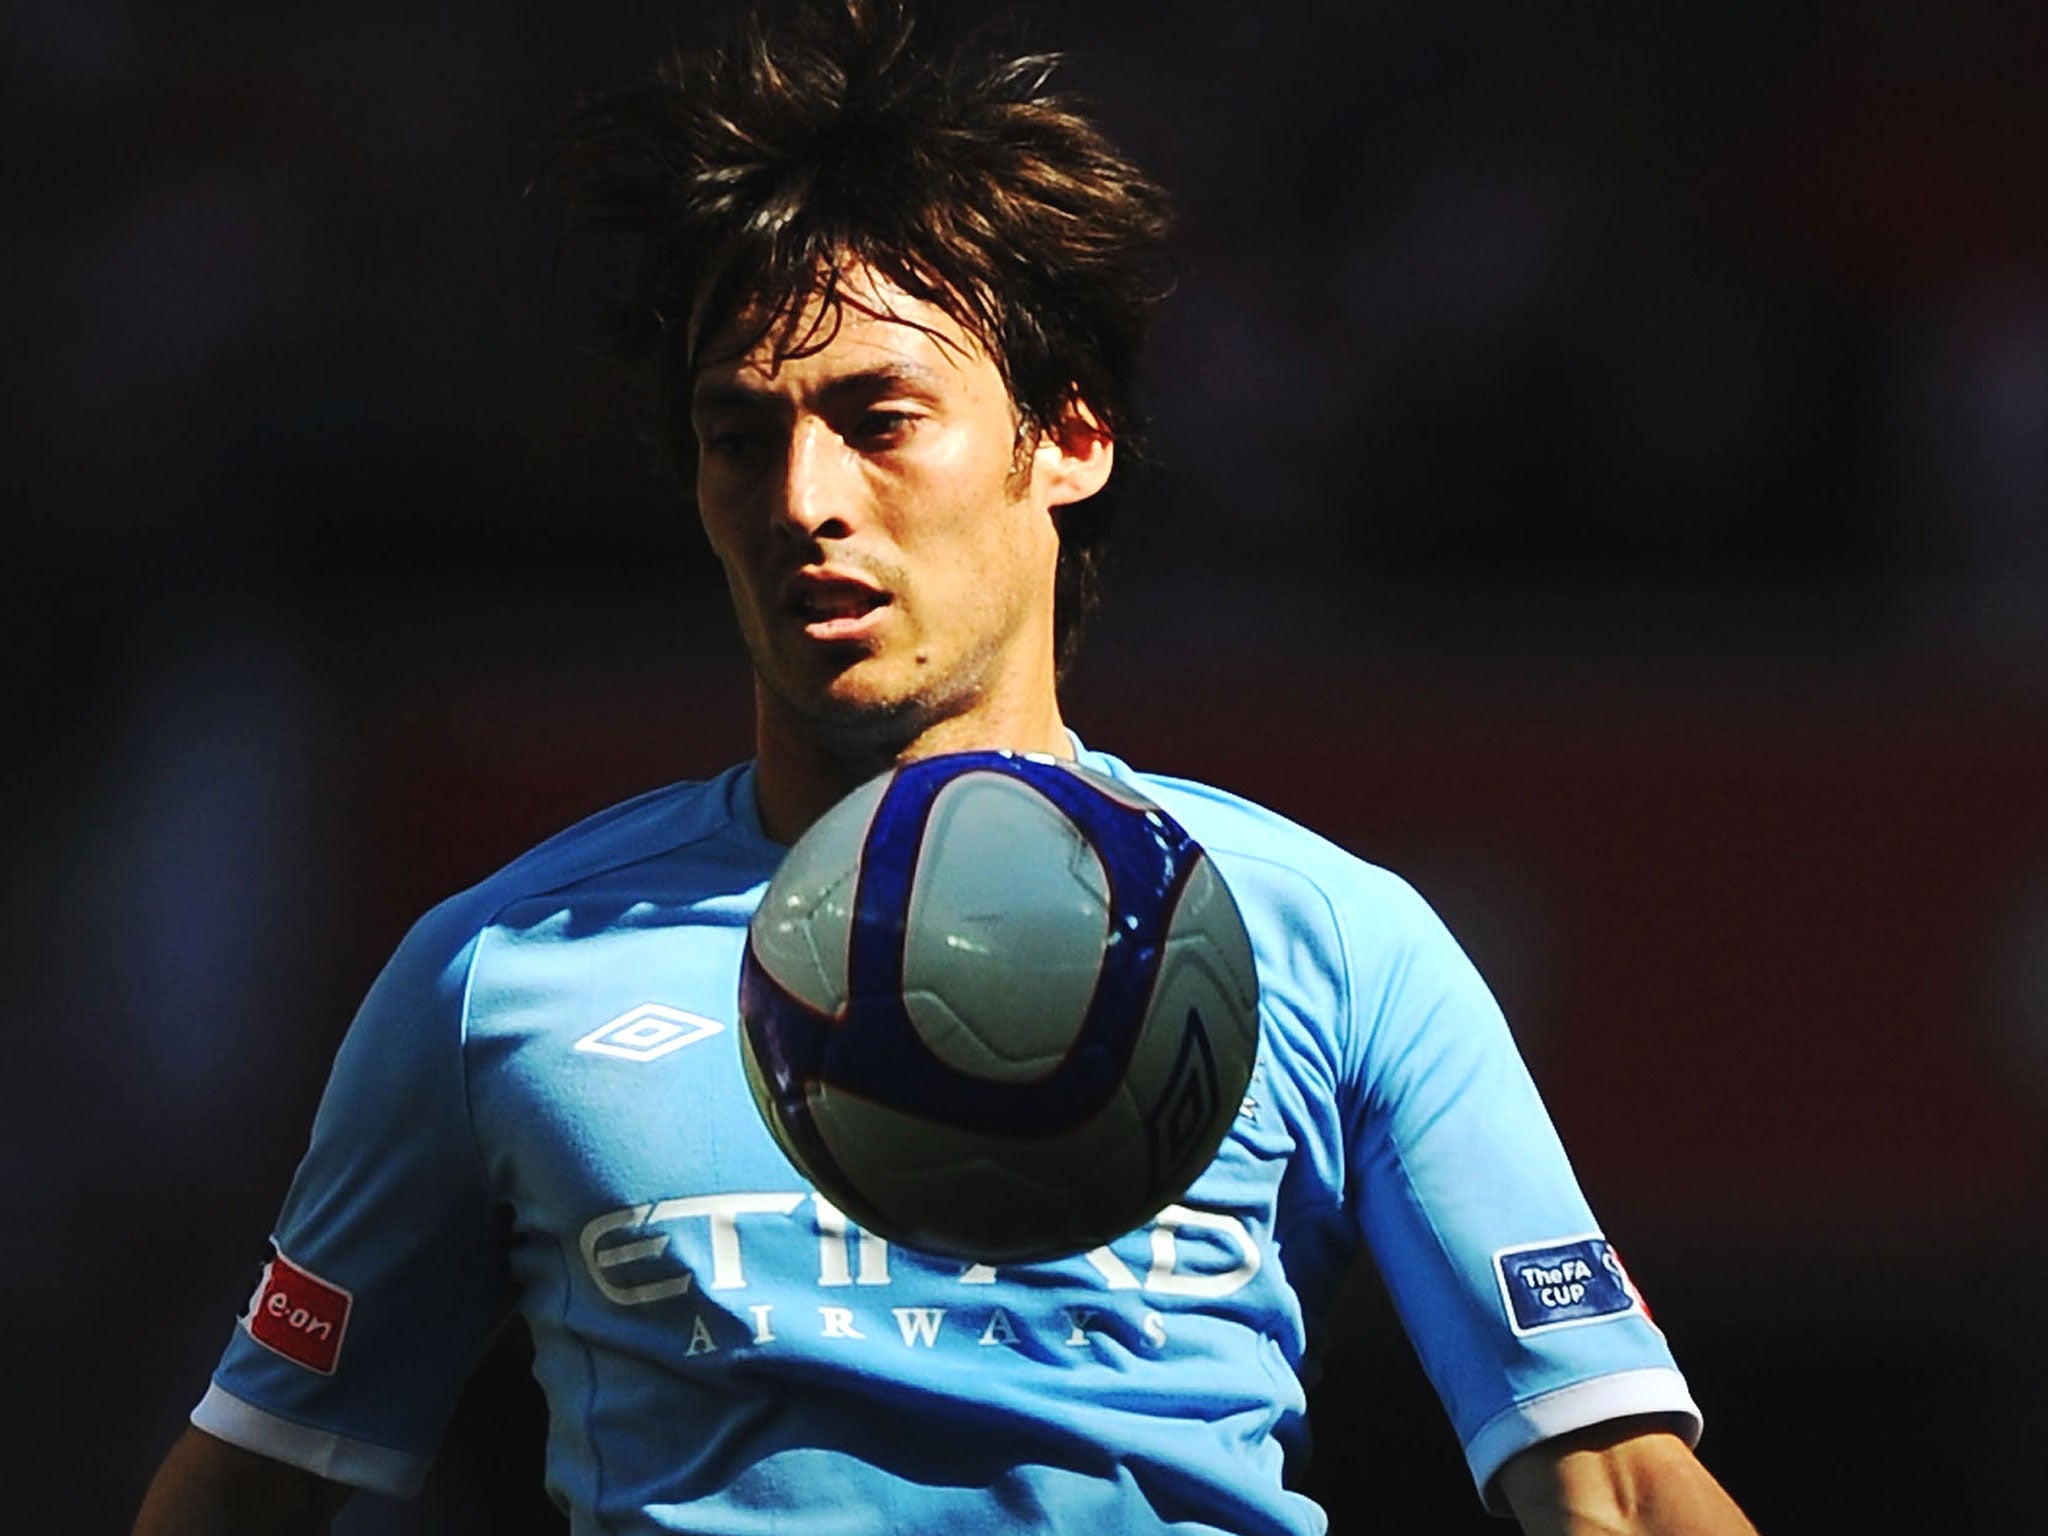 Out of United’s shadow: ‘We are building a team and a club and we will win many more titles,’ says David Silva